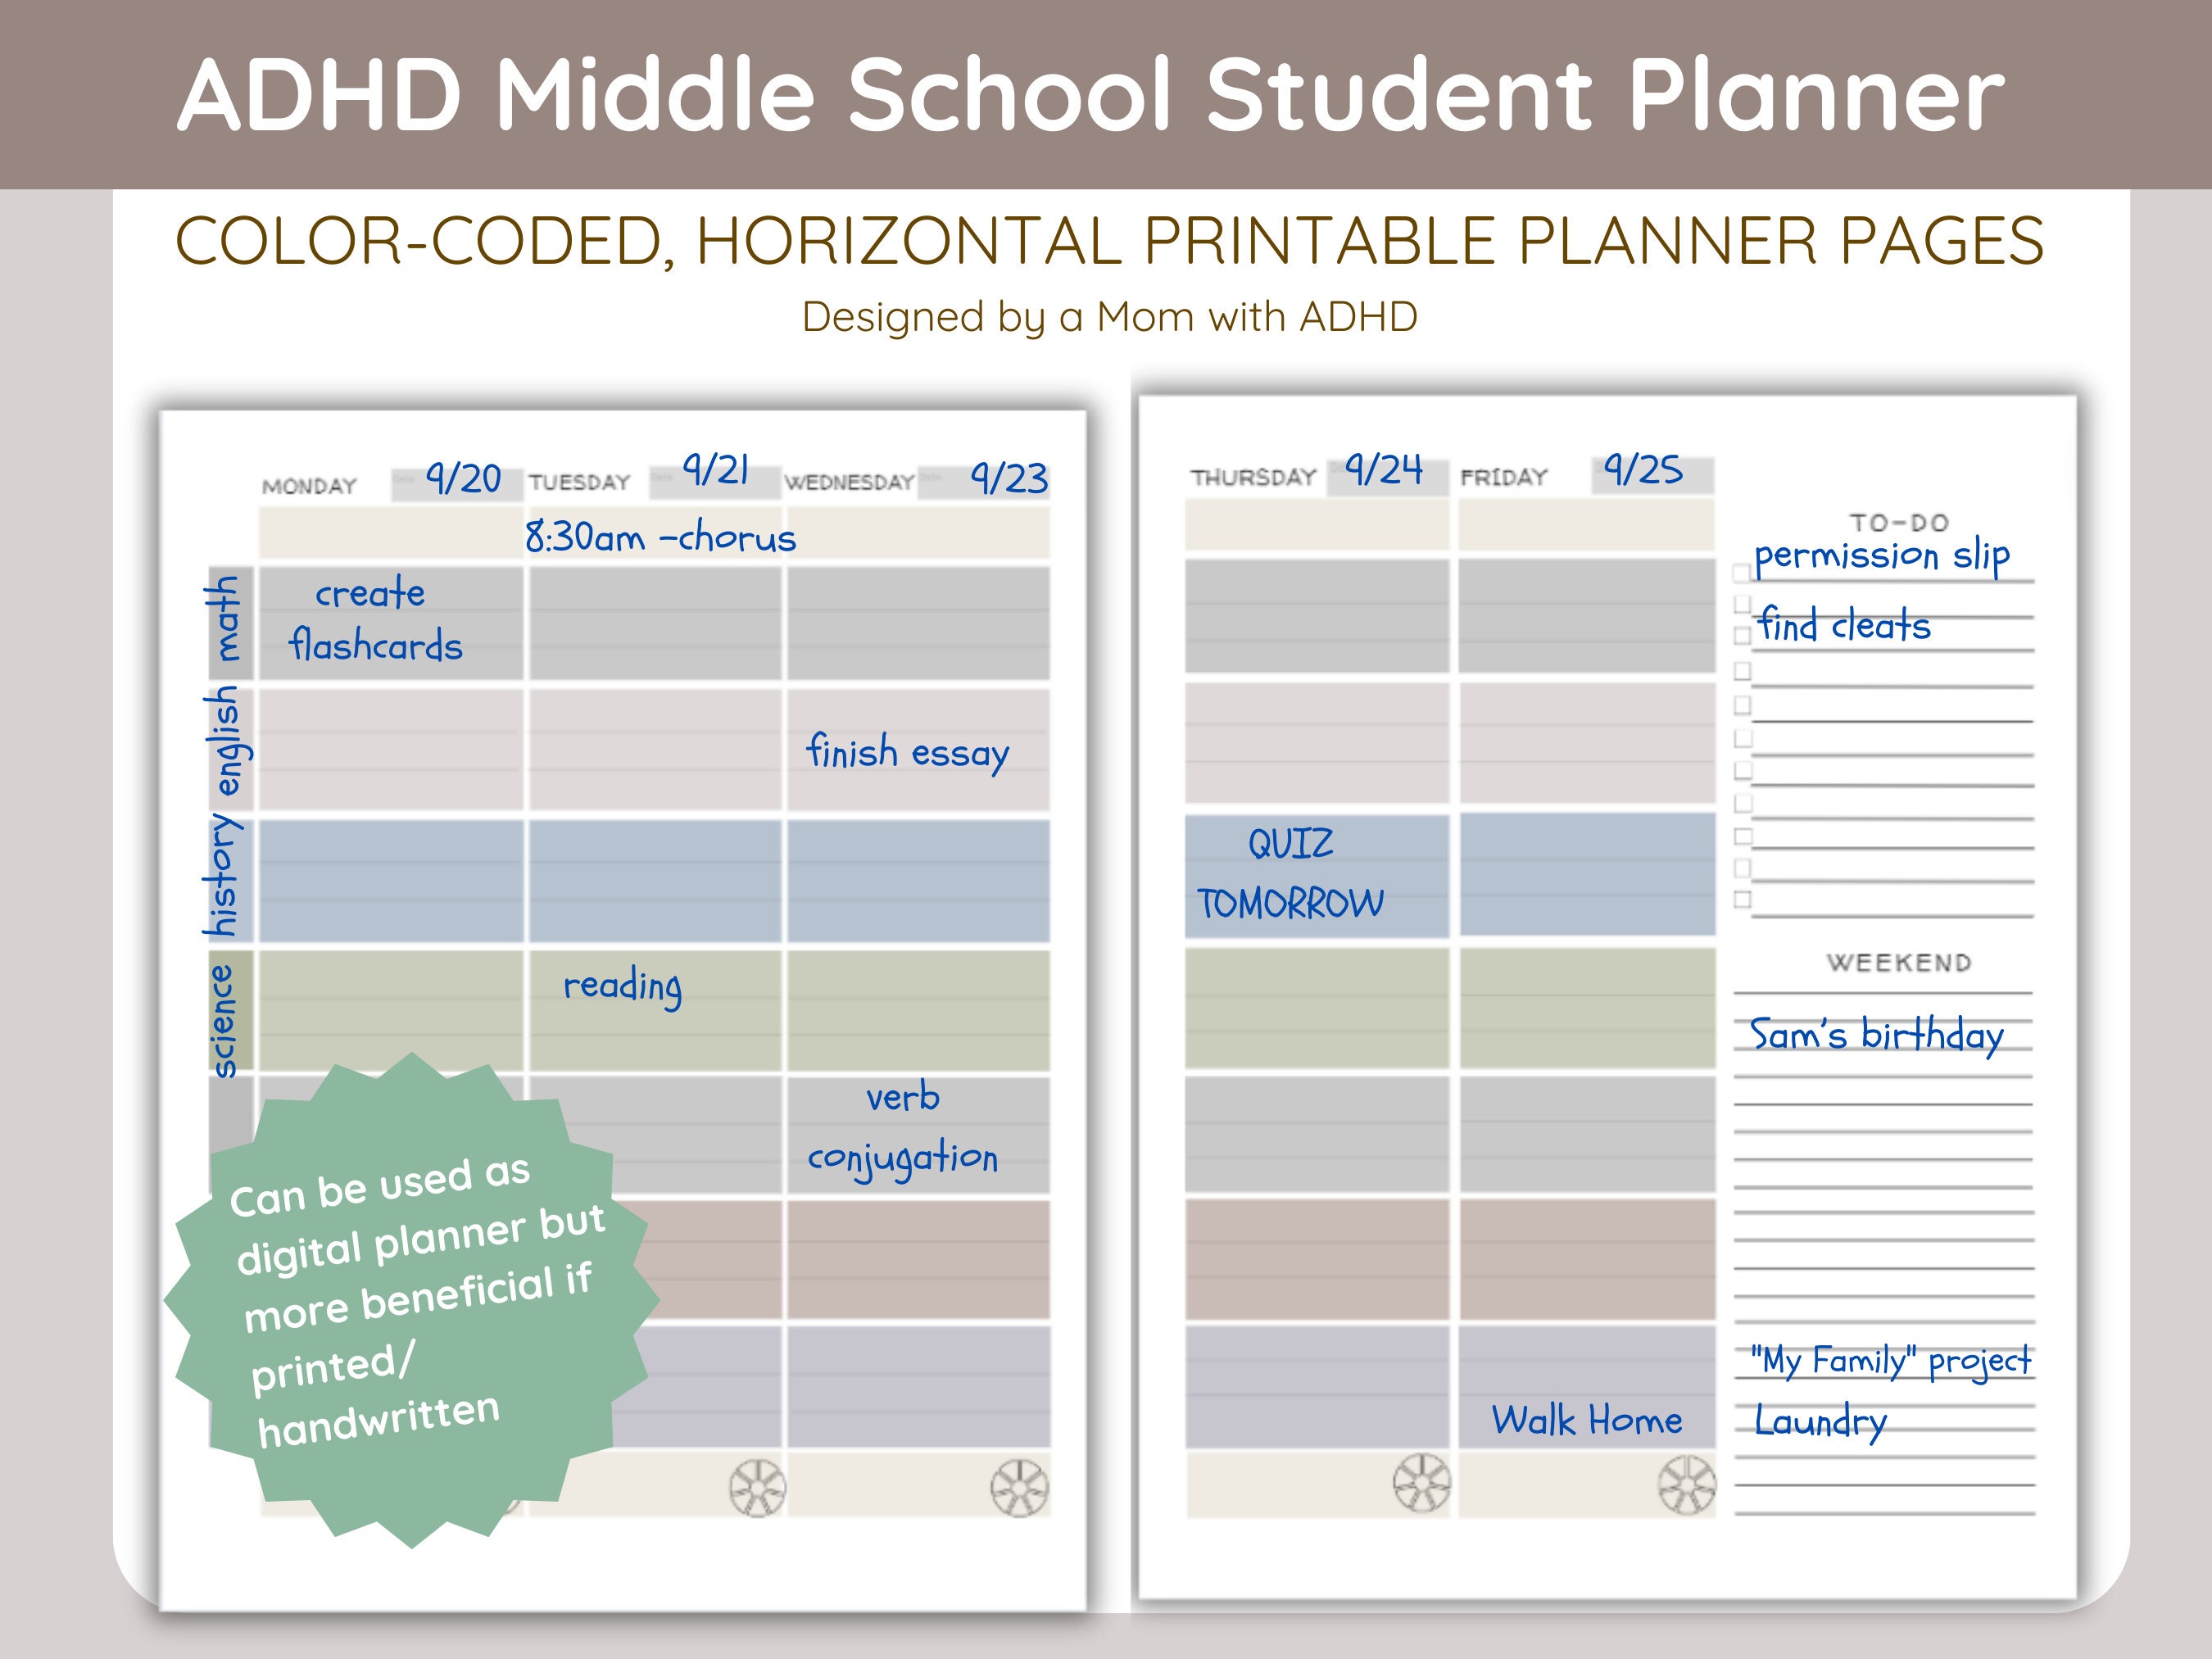 Undated Student Organizer for Middle School, Daily Homeowrk Planner, 8.5 x  11 (SO-8) - KL-5KF3-CI7Y 